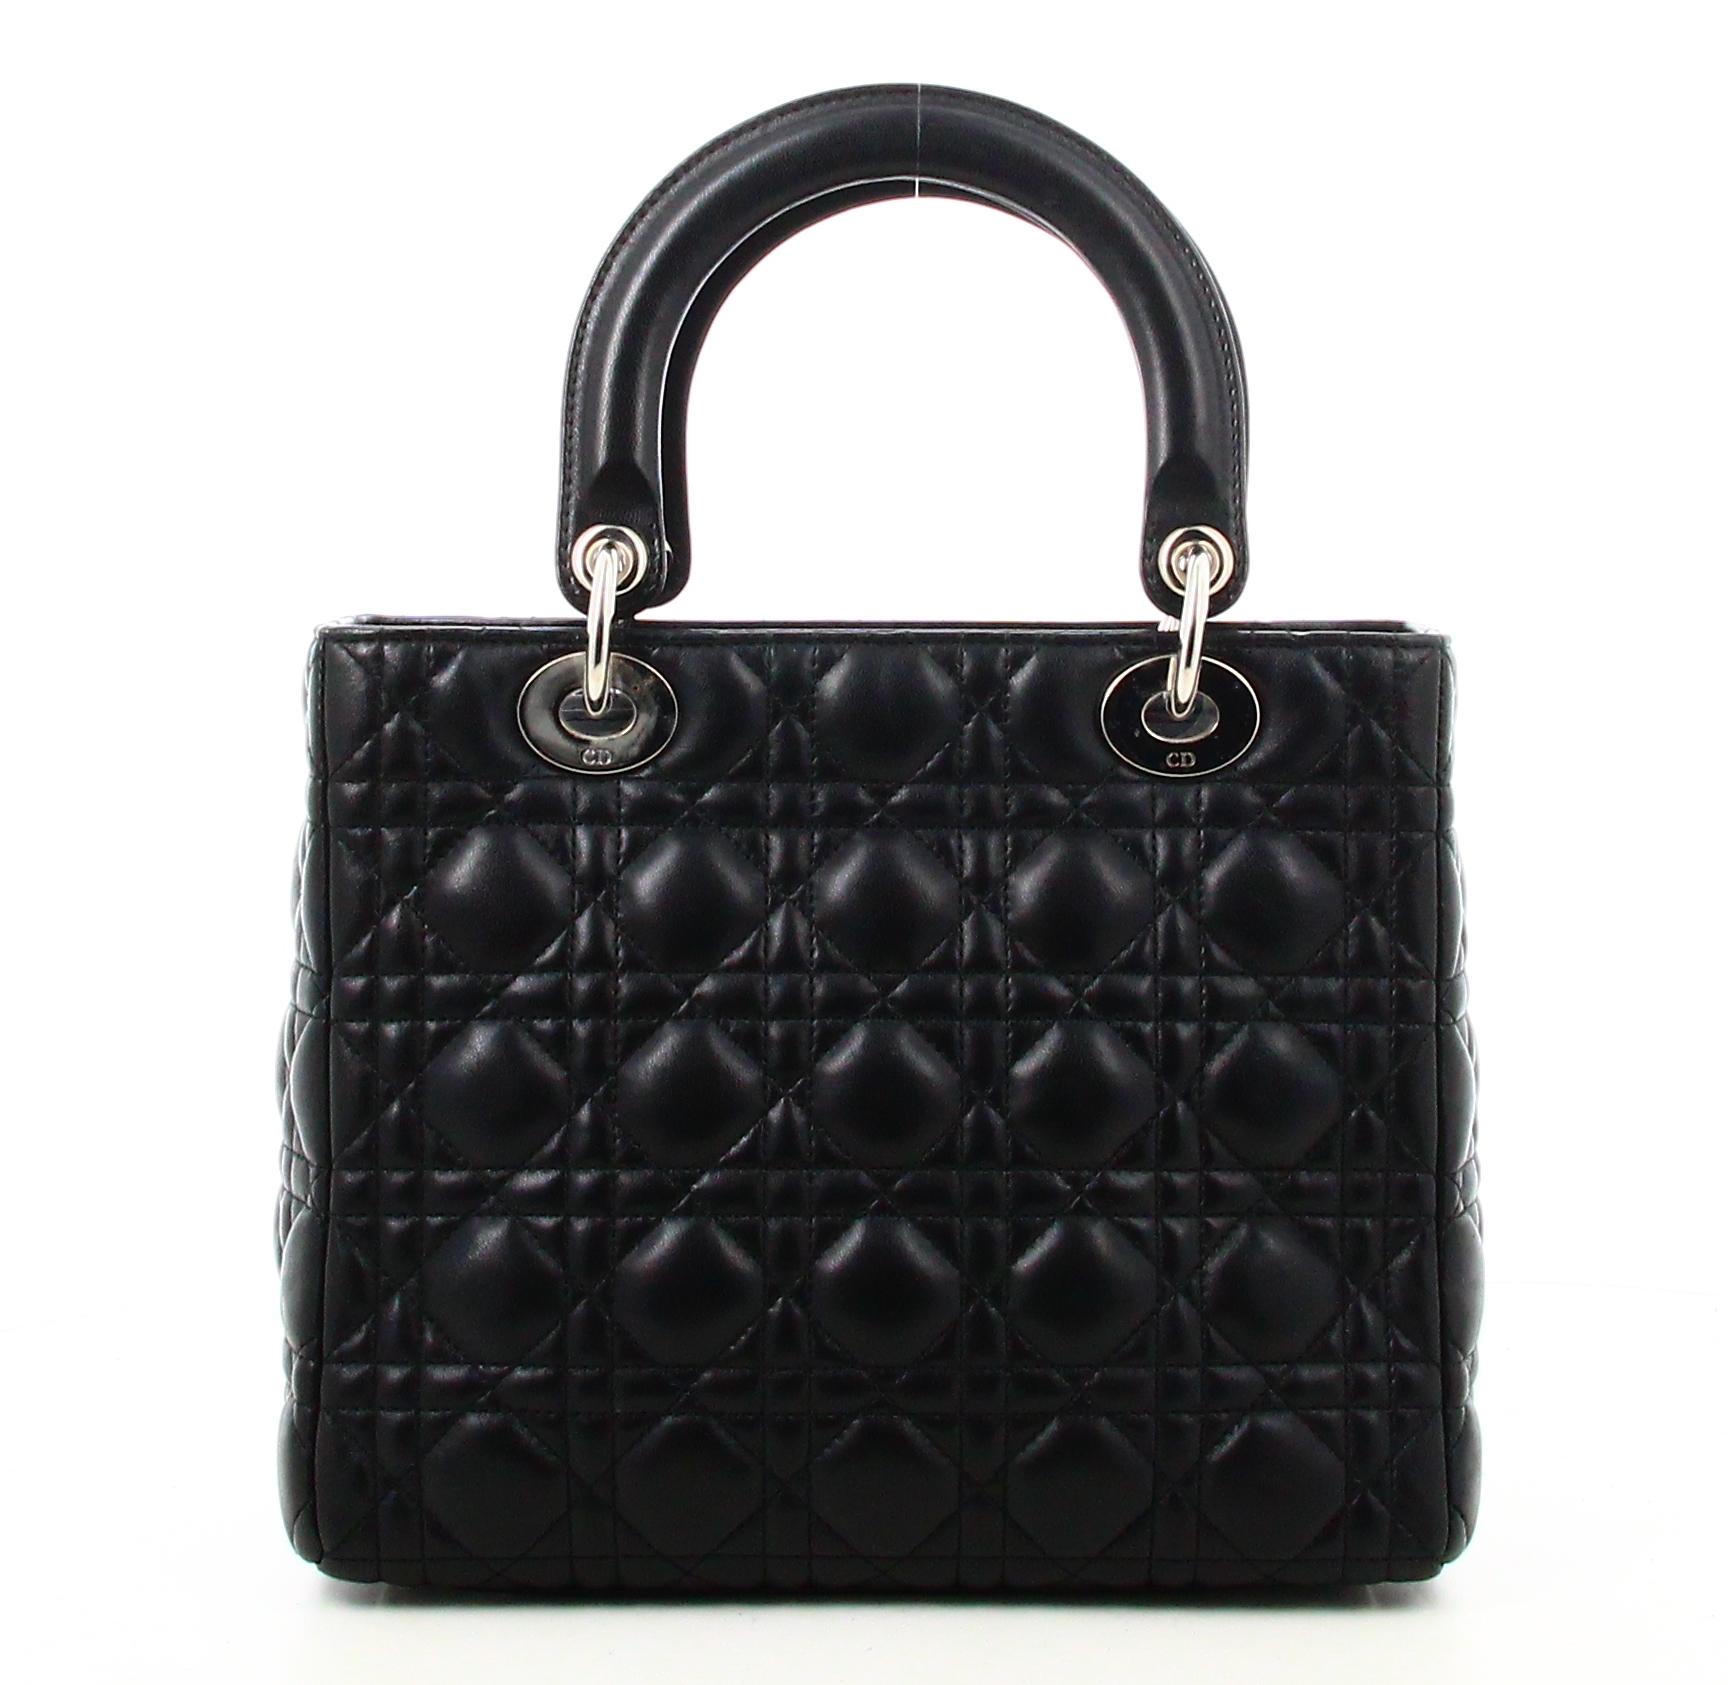 Medium Handbag Lambskin Cannage Lady Dior

- Very good condition. Shows very slight signs of wear over time. 
- Lady Dior Handbag 
- Black leather 
- Two black leather handles 
- Clasp: silver zipper 
- Inside: black leather plus zipped pocket